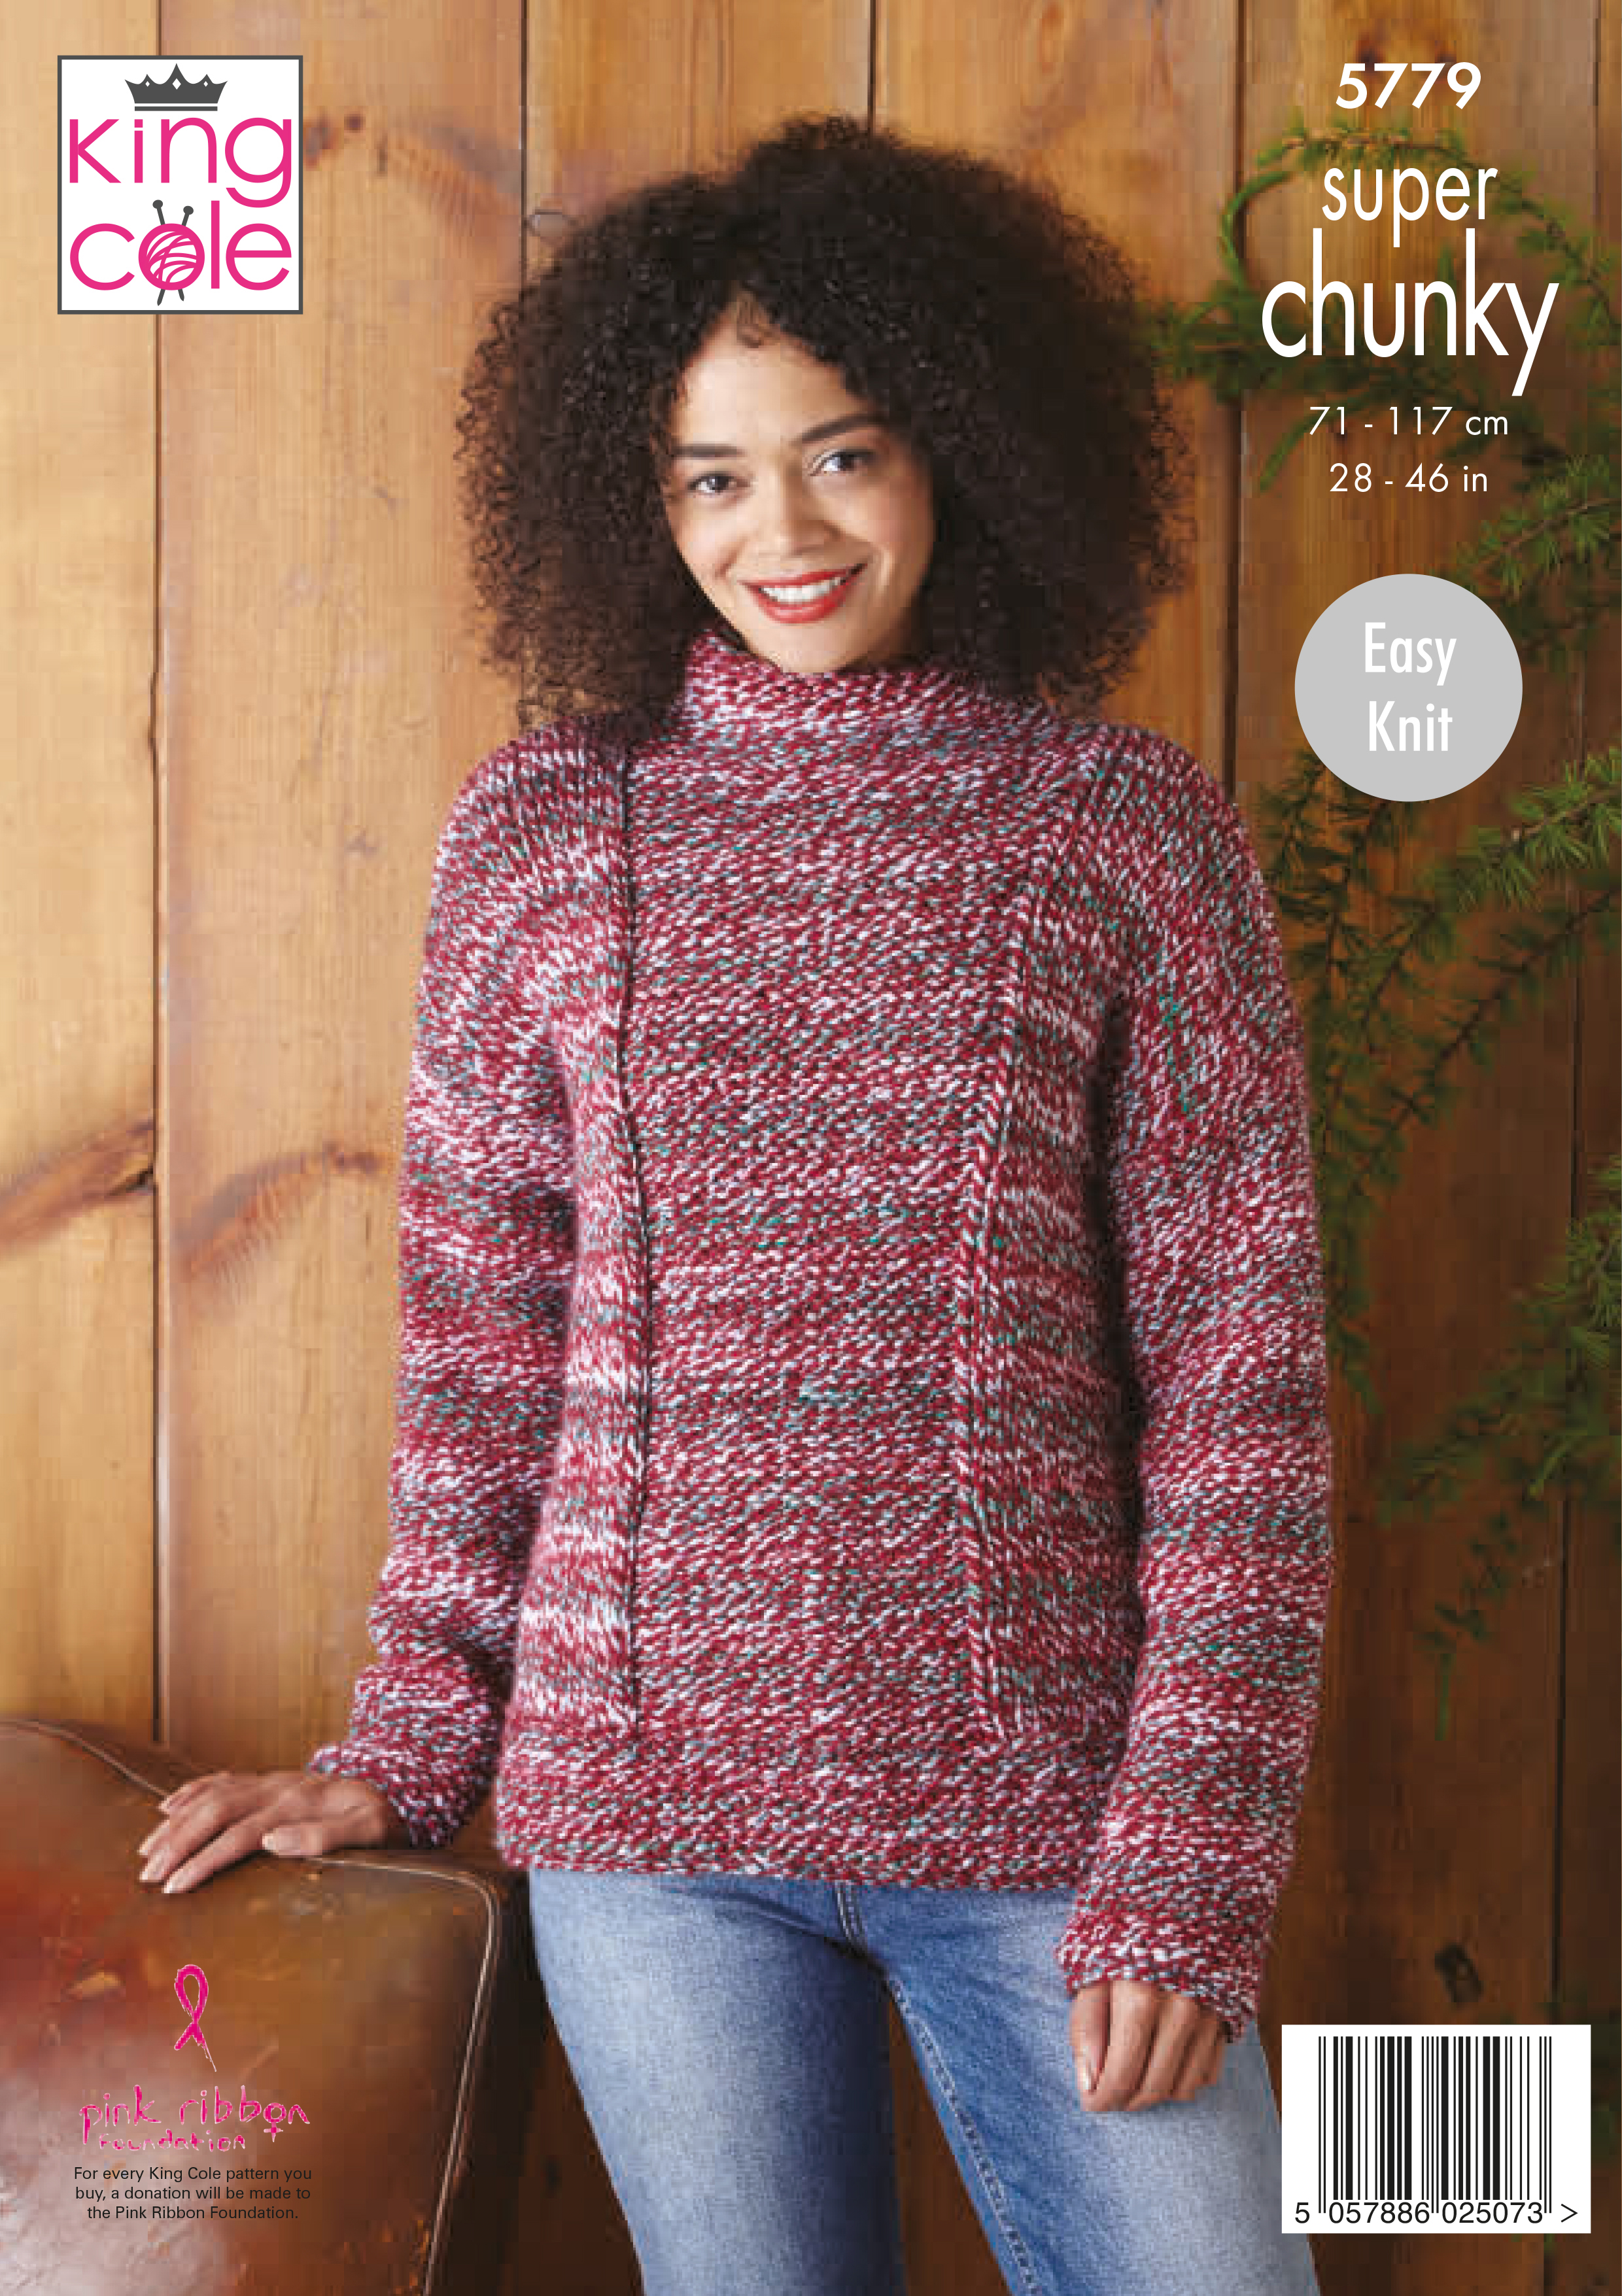 Jacket & Sweater Knitted in Christmas Super Chunky 5779 x3